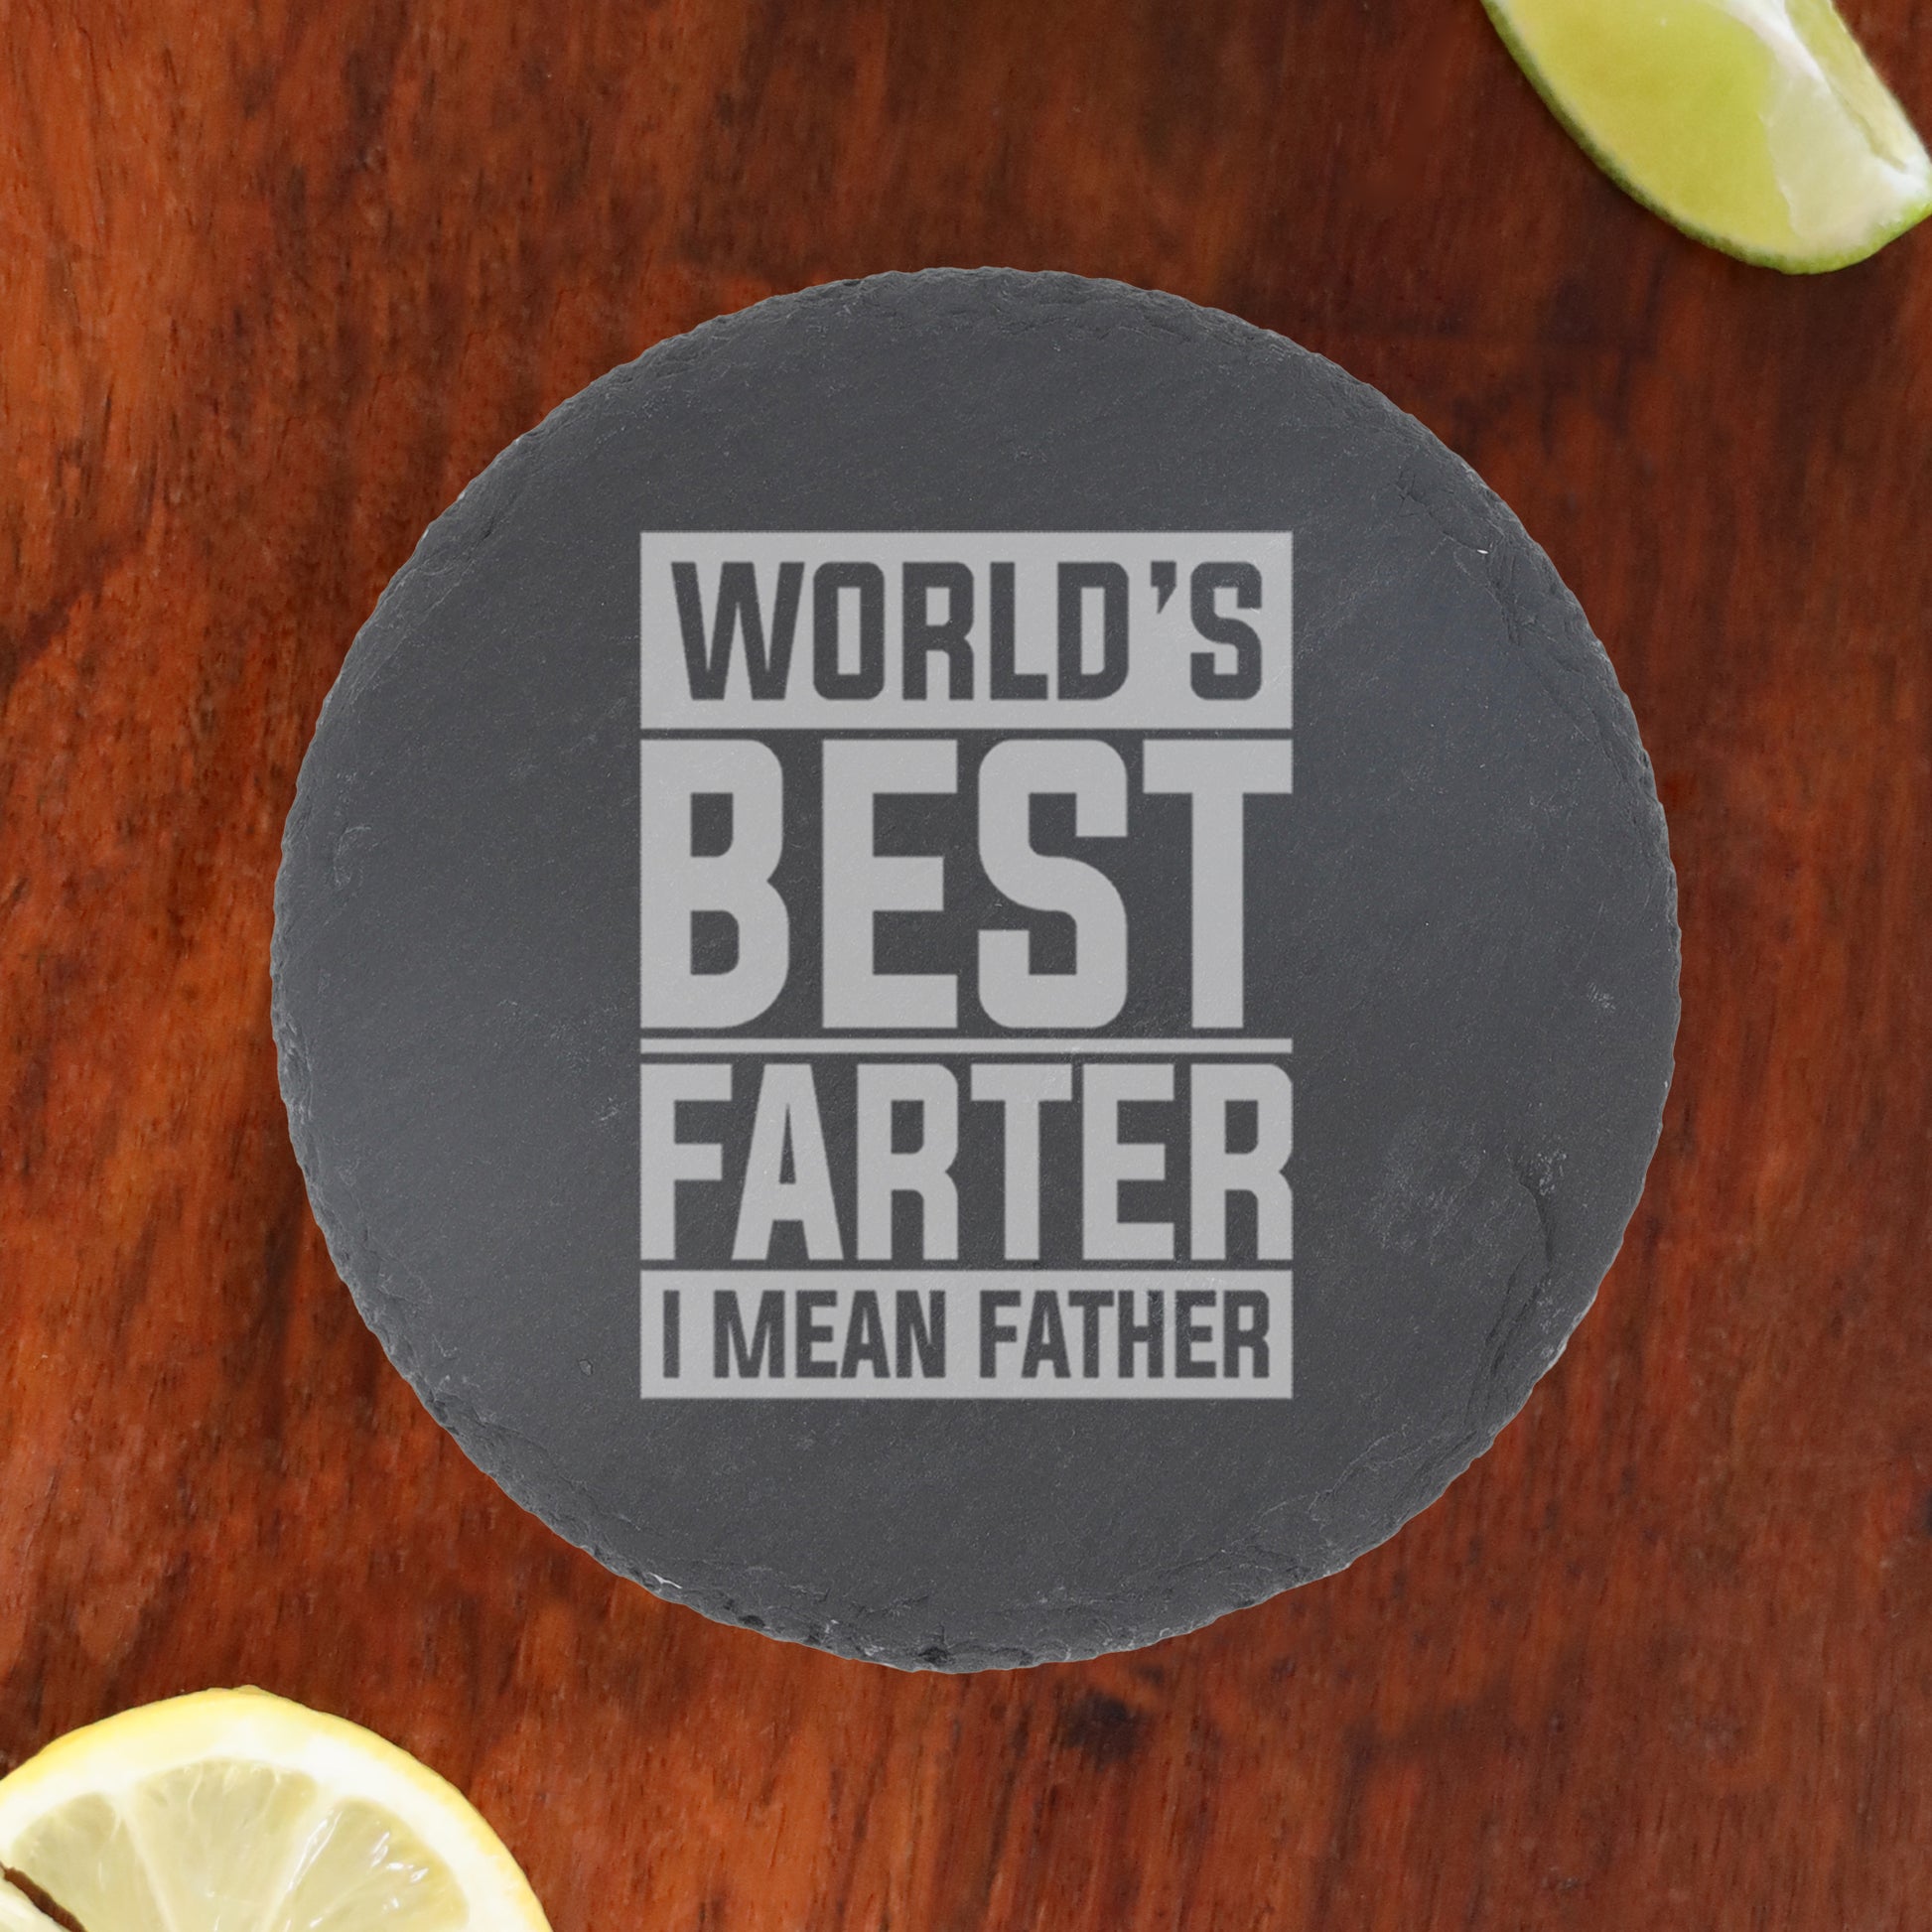 "Worlds Best Farter I Mean Father" Novelty Engraved Whisky Glass and/or Coaster Set  - Always Looking Good - Round Coaster Only  